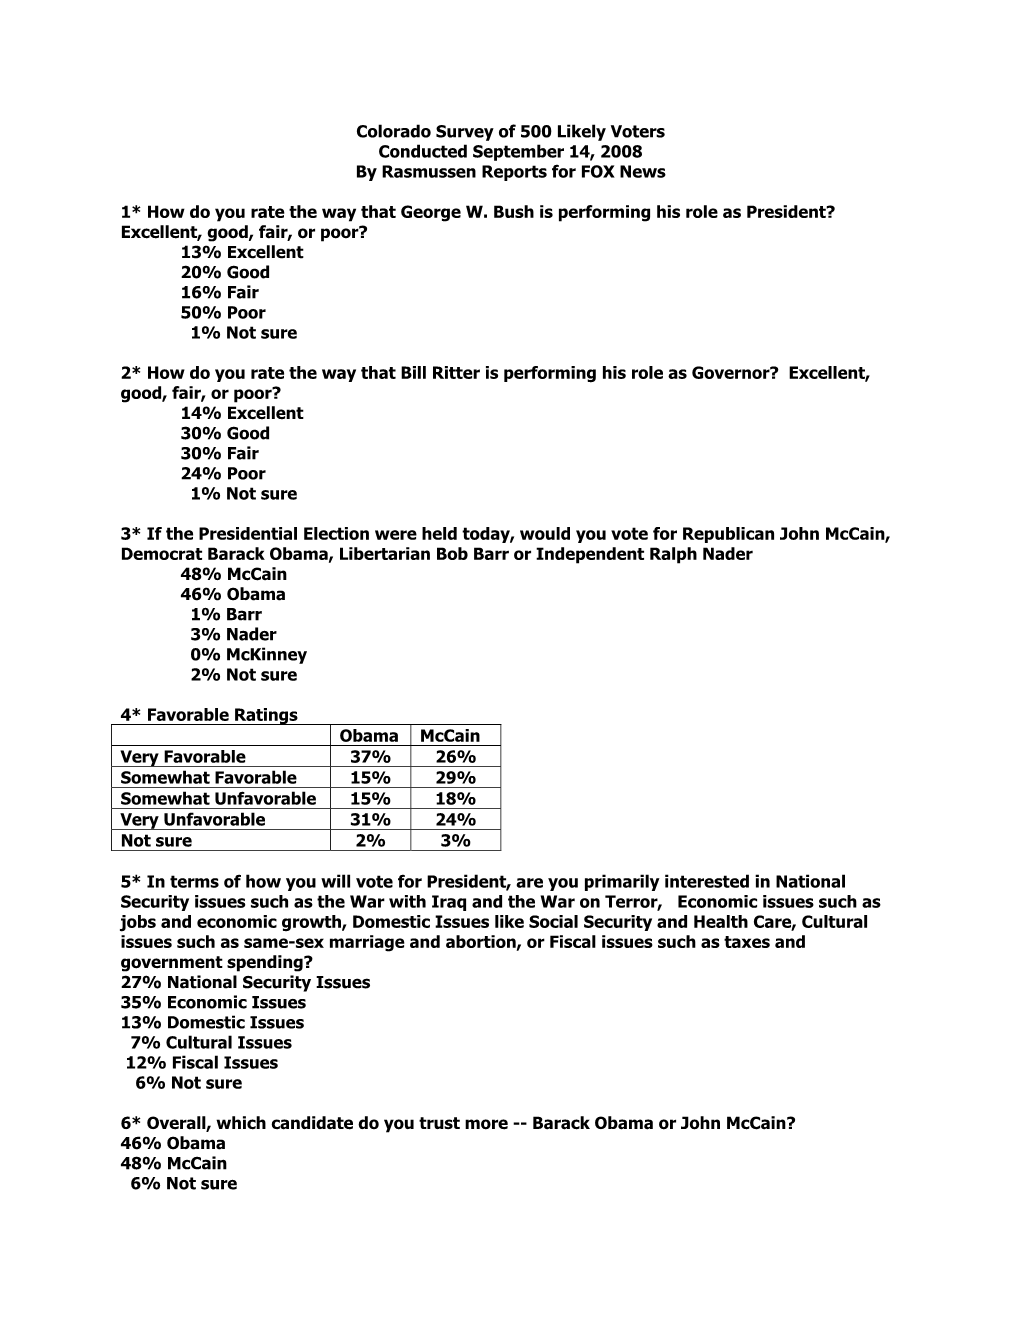 Colorado Survey of 500 Likely Voters Conducted September 14, 2008 by Rasmussen Reports for FOX News